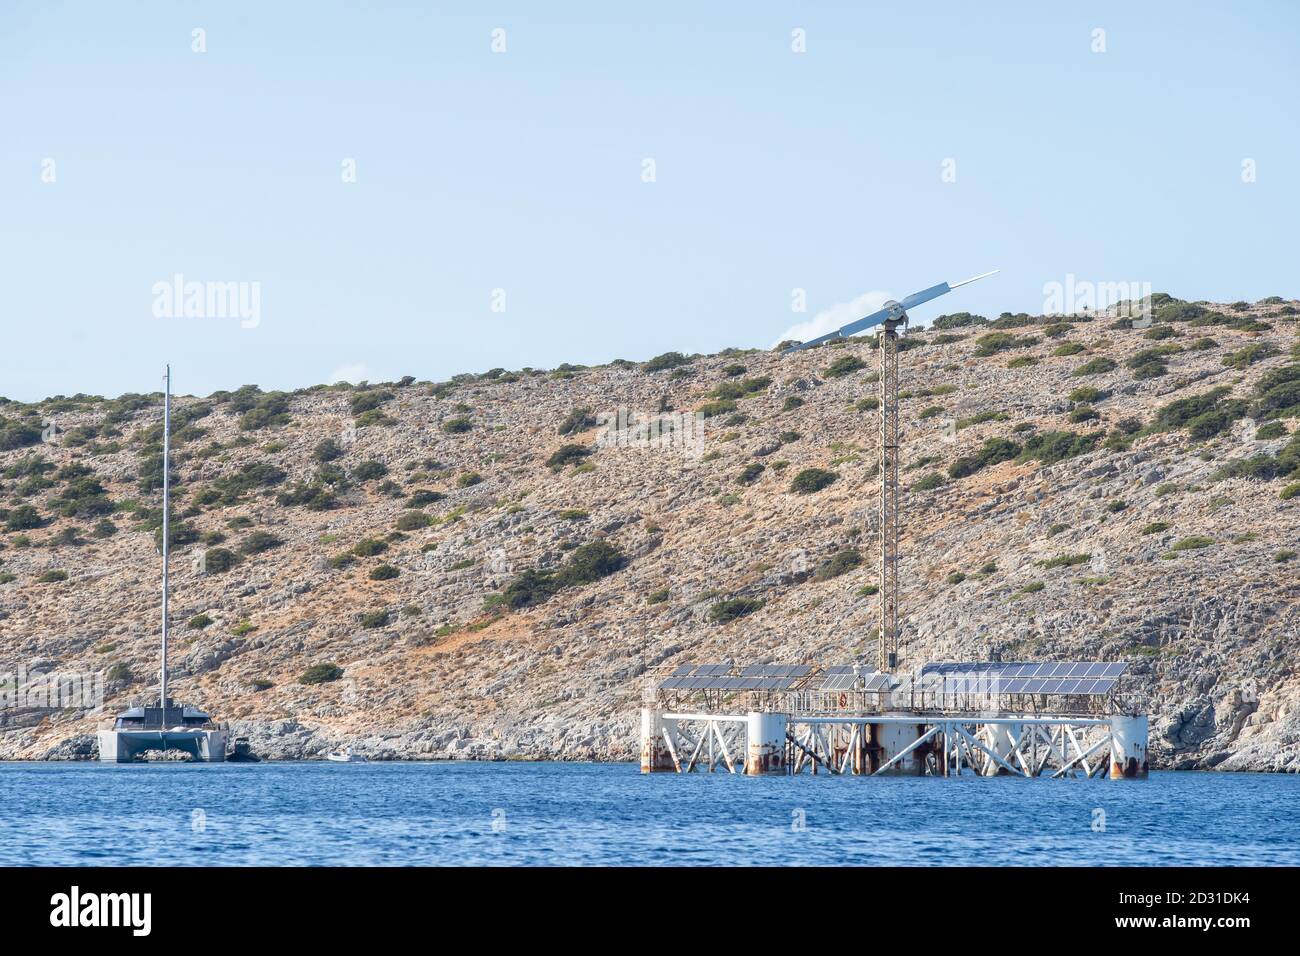 Solarwind power production on a floatable construction at Iraklia,Cyclades,Greece Stock Photo